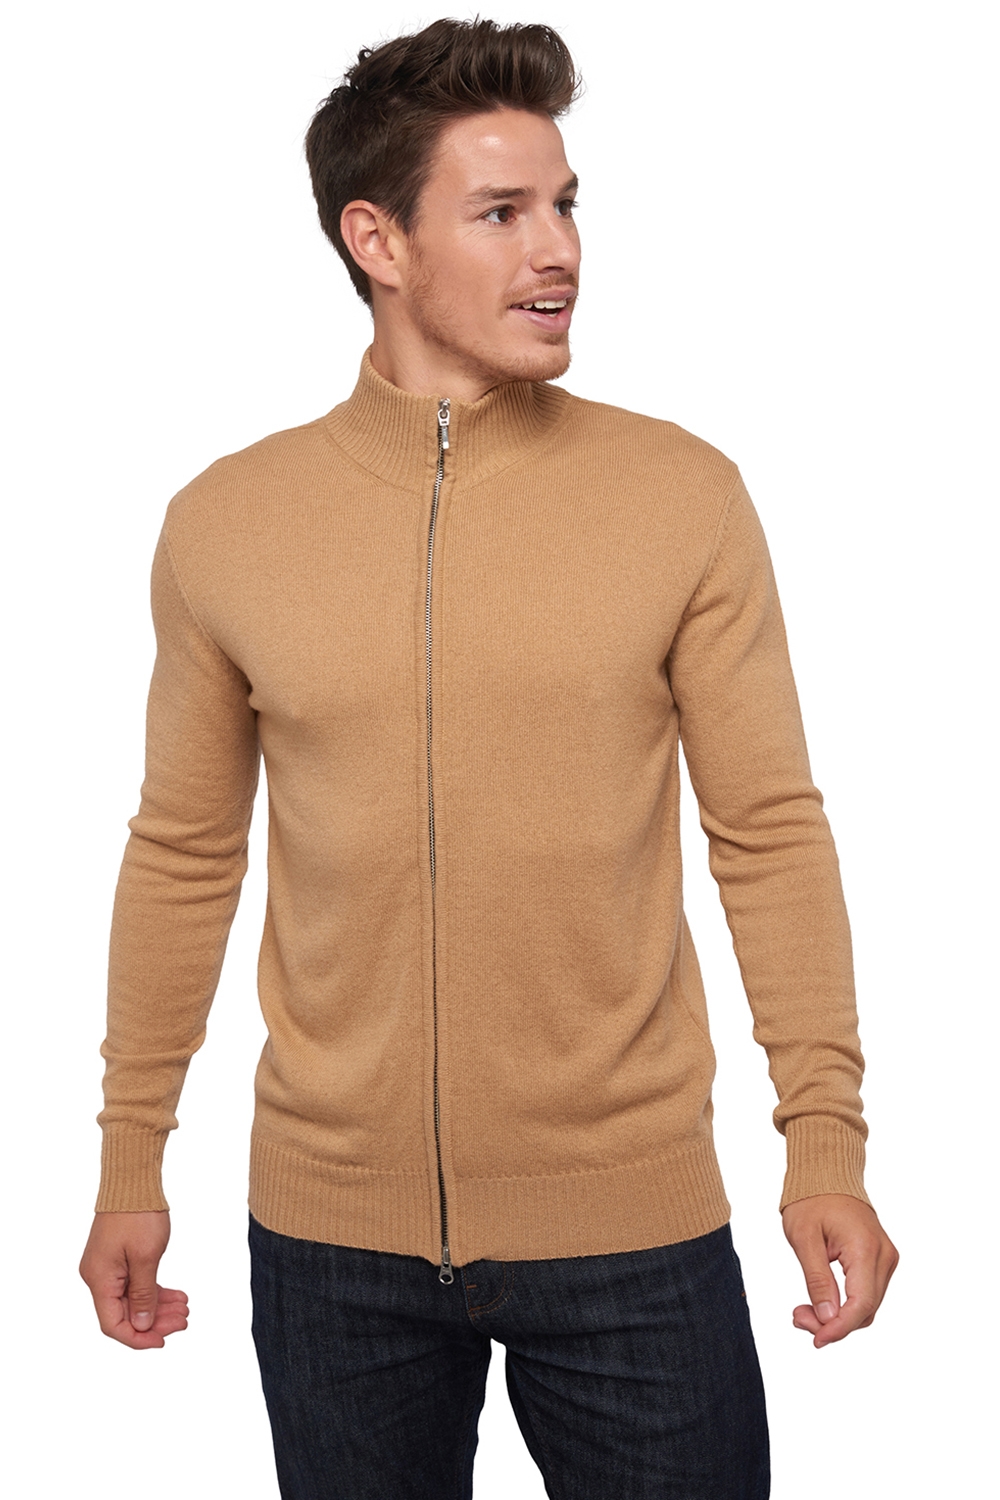 Cashmere men basic sweaters at low prices thobias first camel m